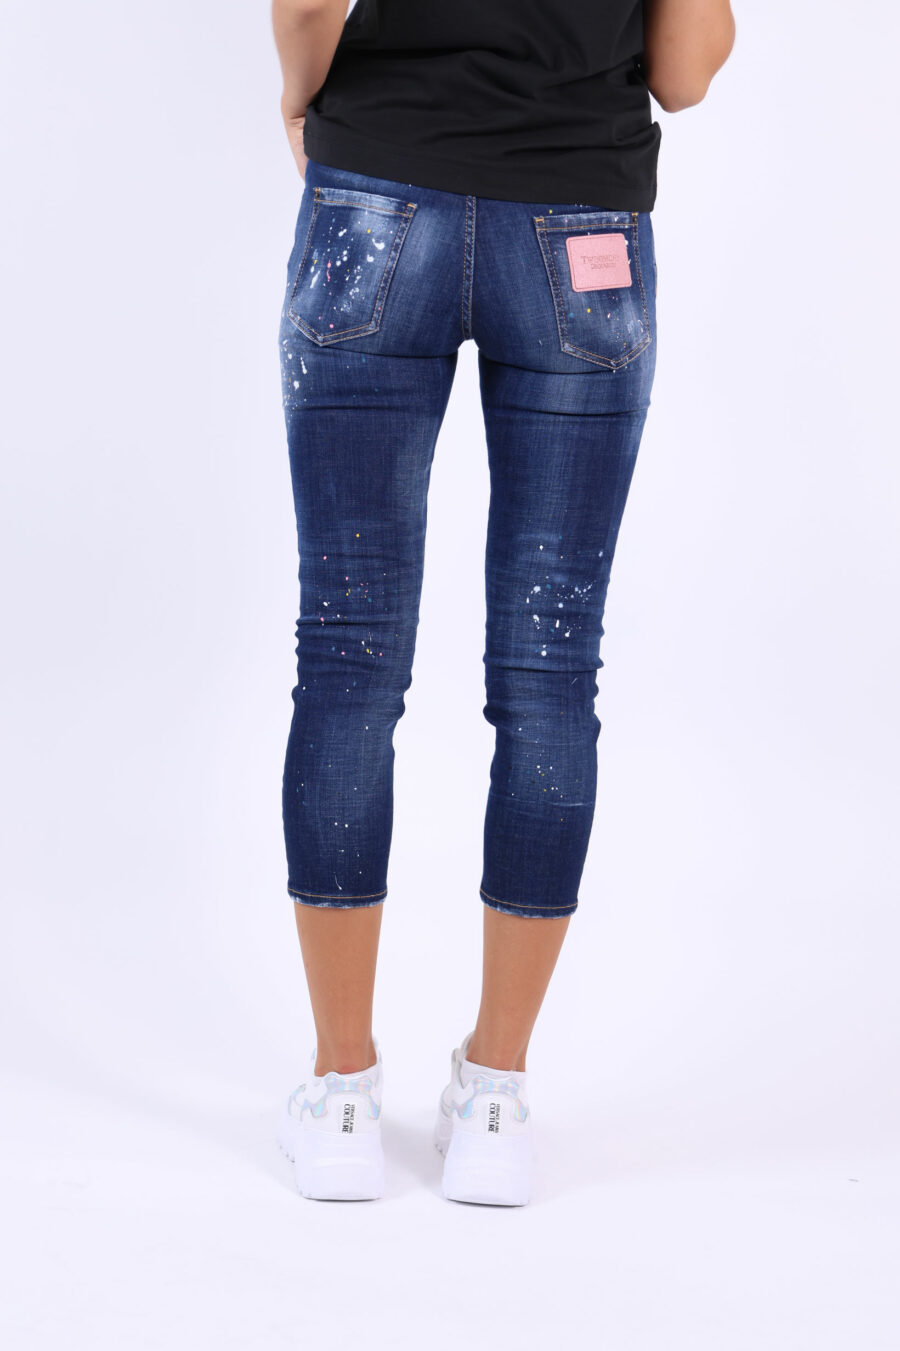 Cool girl cropped jean trousers "Cool girl cropped jean" blue worn with rips - 361223054662202025